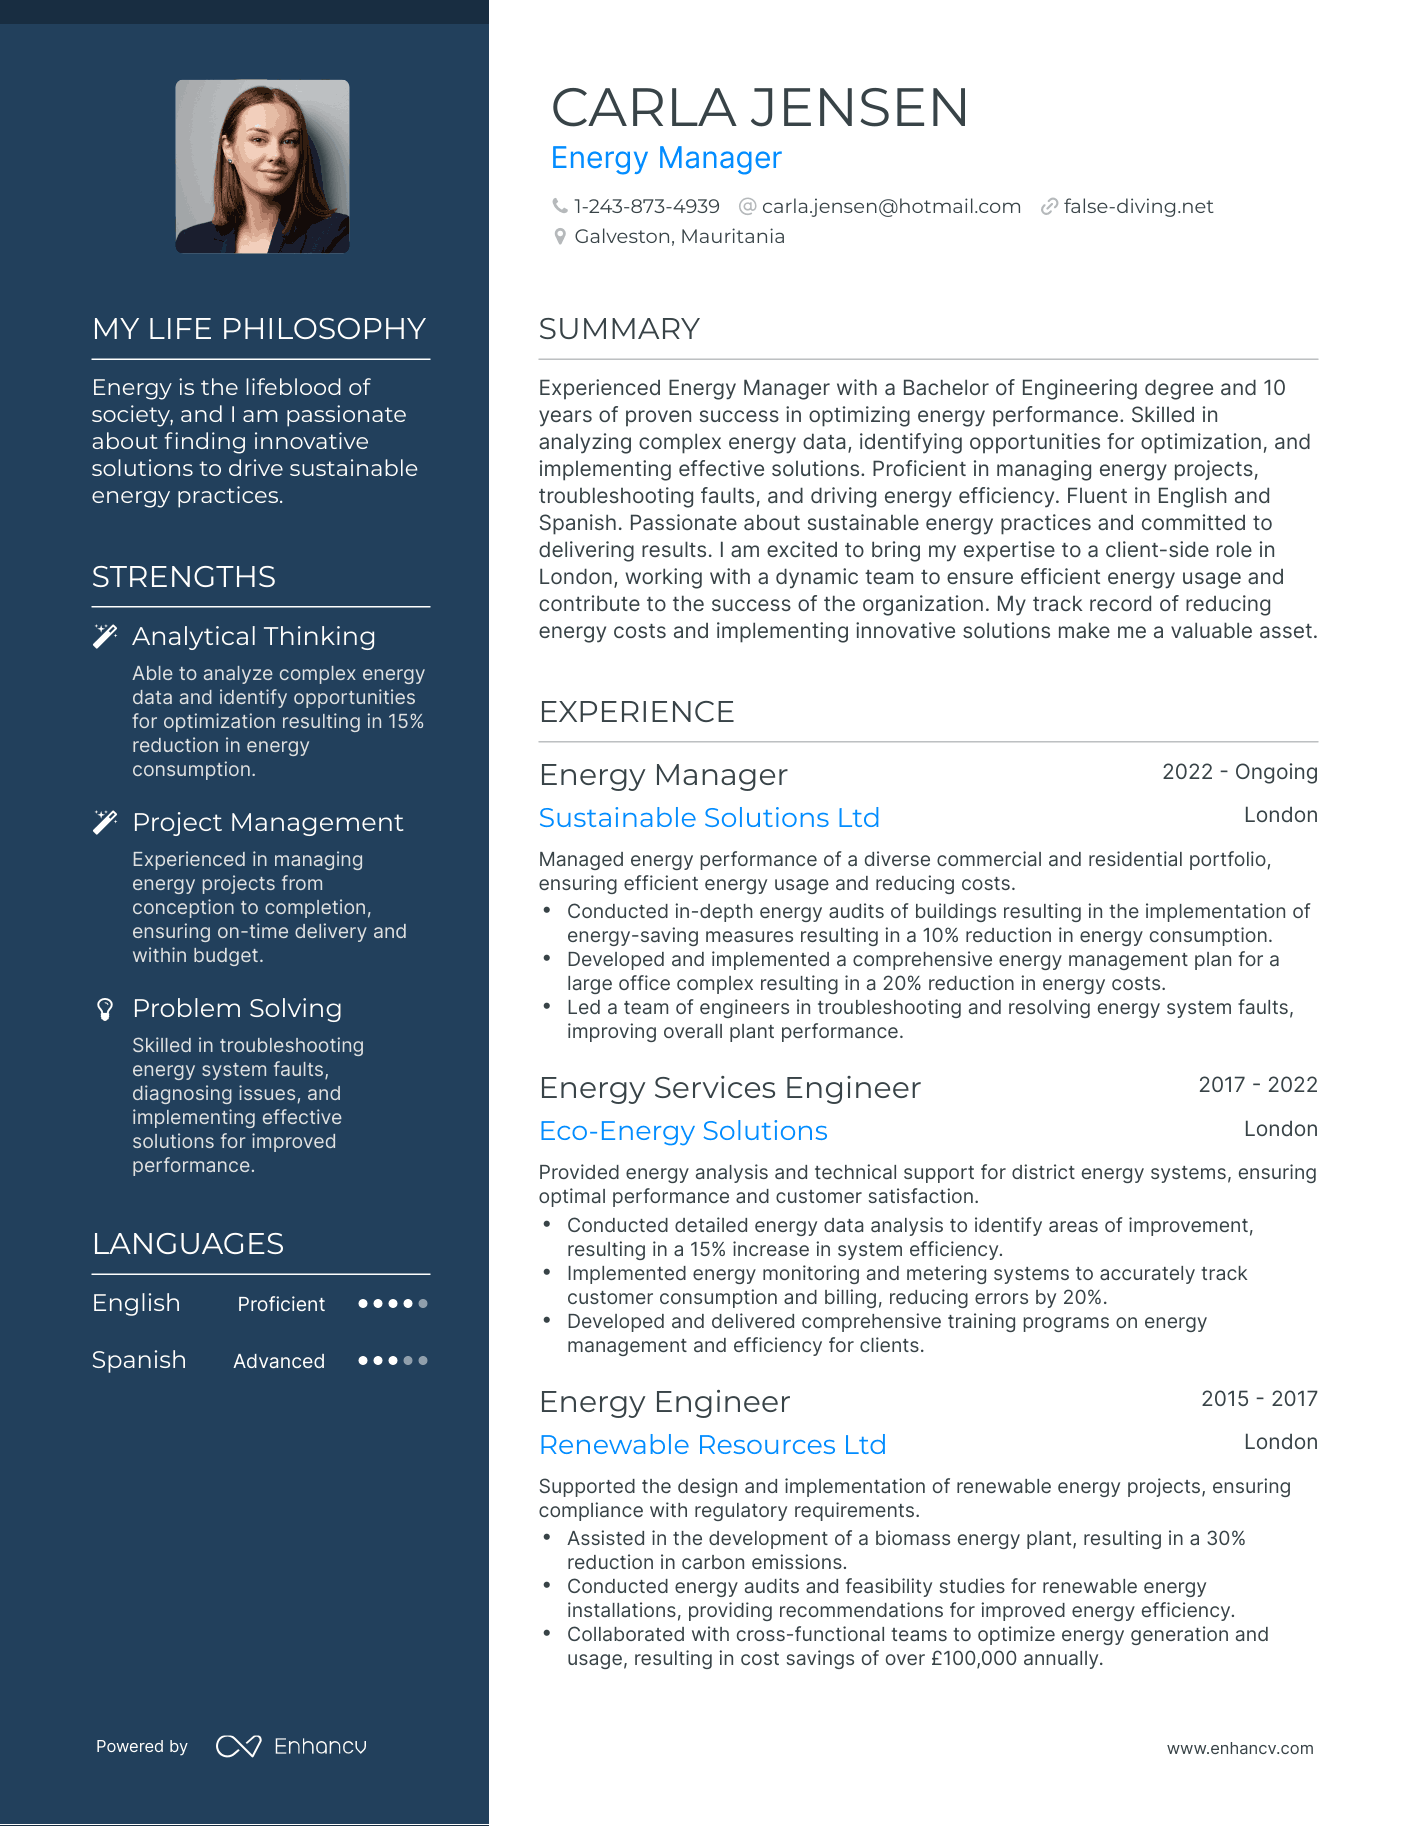 Energy Manager resume example